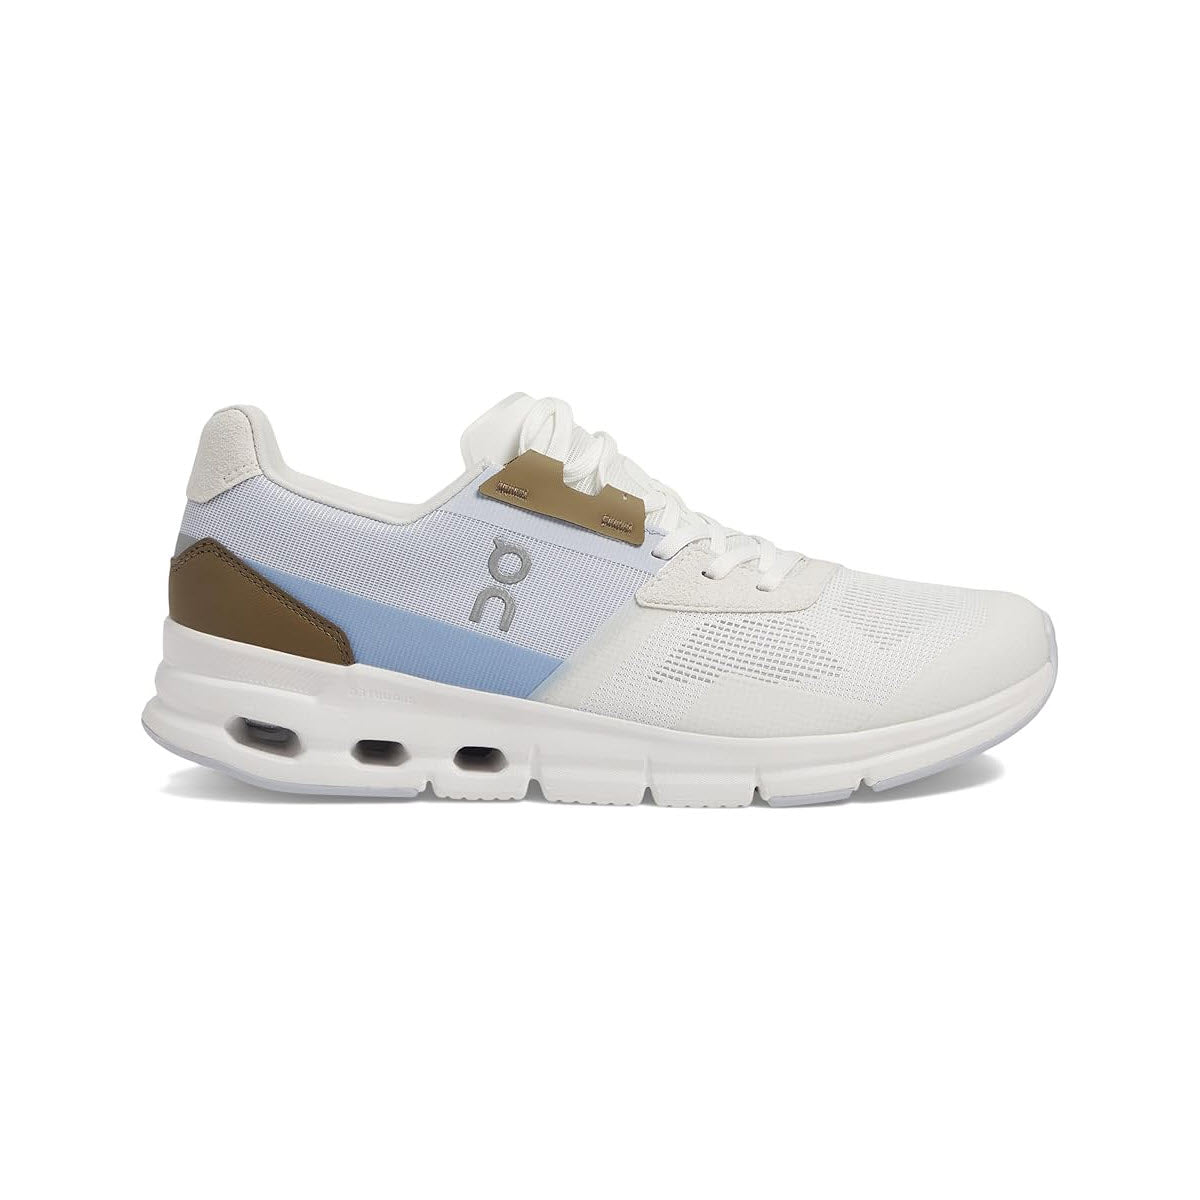 A white On Running Cloudrift IVORY/HEATHER athletic shoe with blue and tan accents, featuring a lace-up closure and cushioned soles.